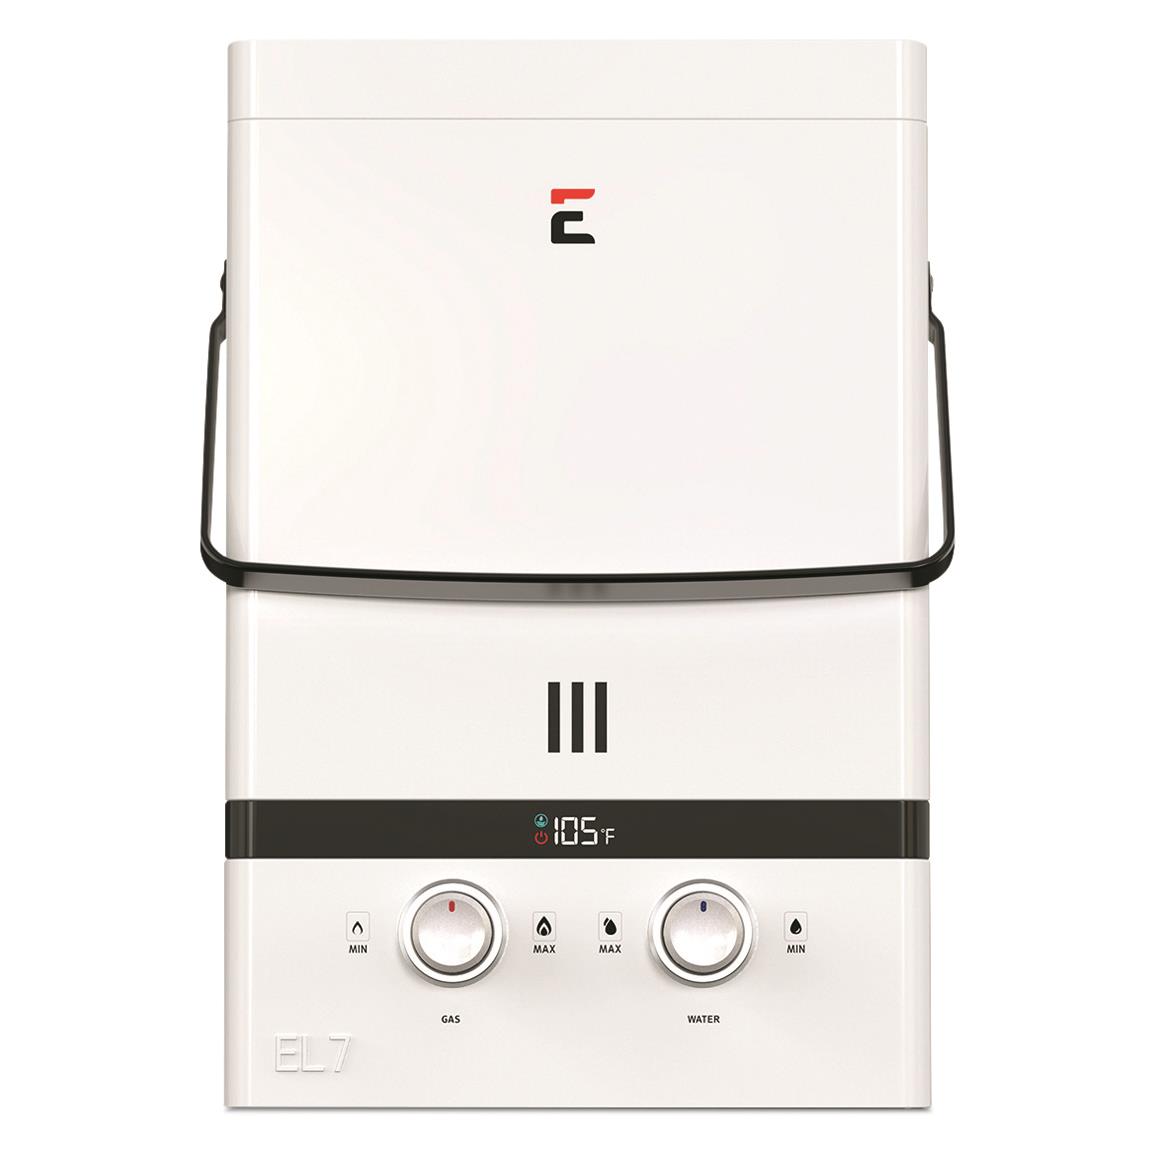 Eccotemp Luxe EL7 1.85 GPM 52K BTU Outdoor Portable Tankless Water Heater with LED Display